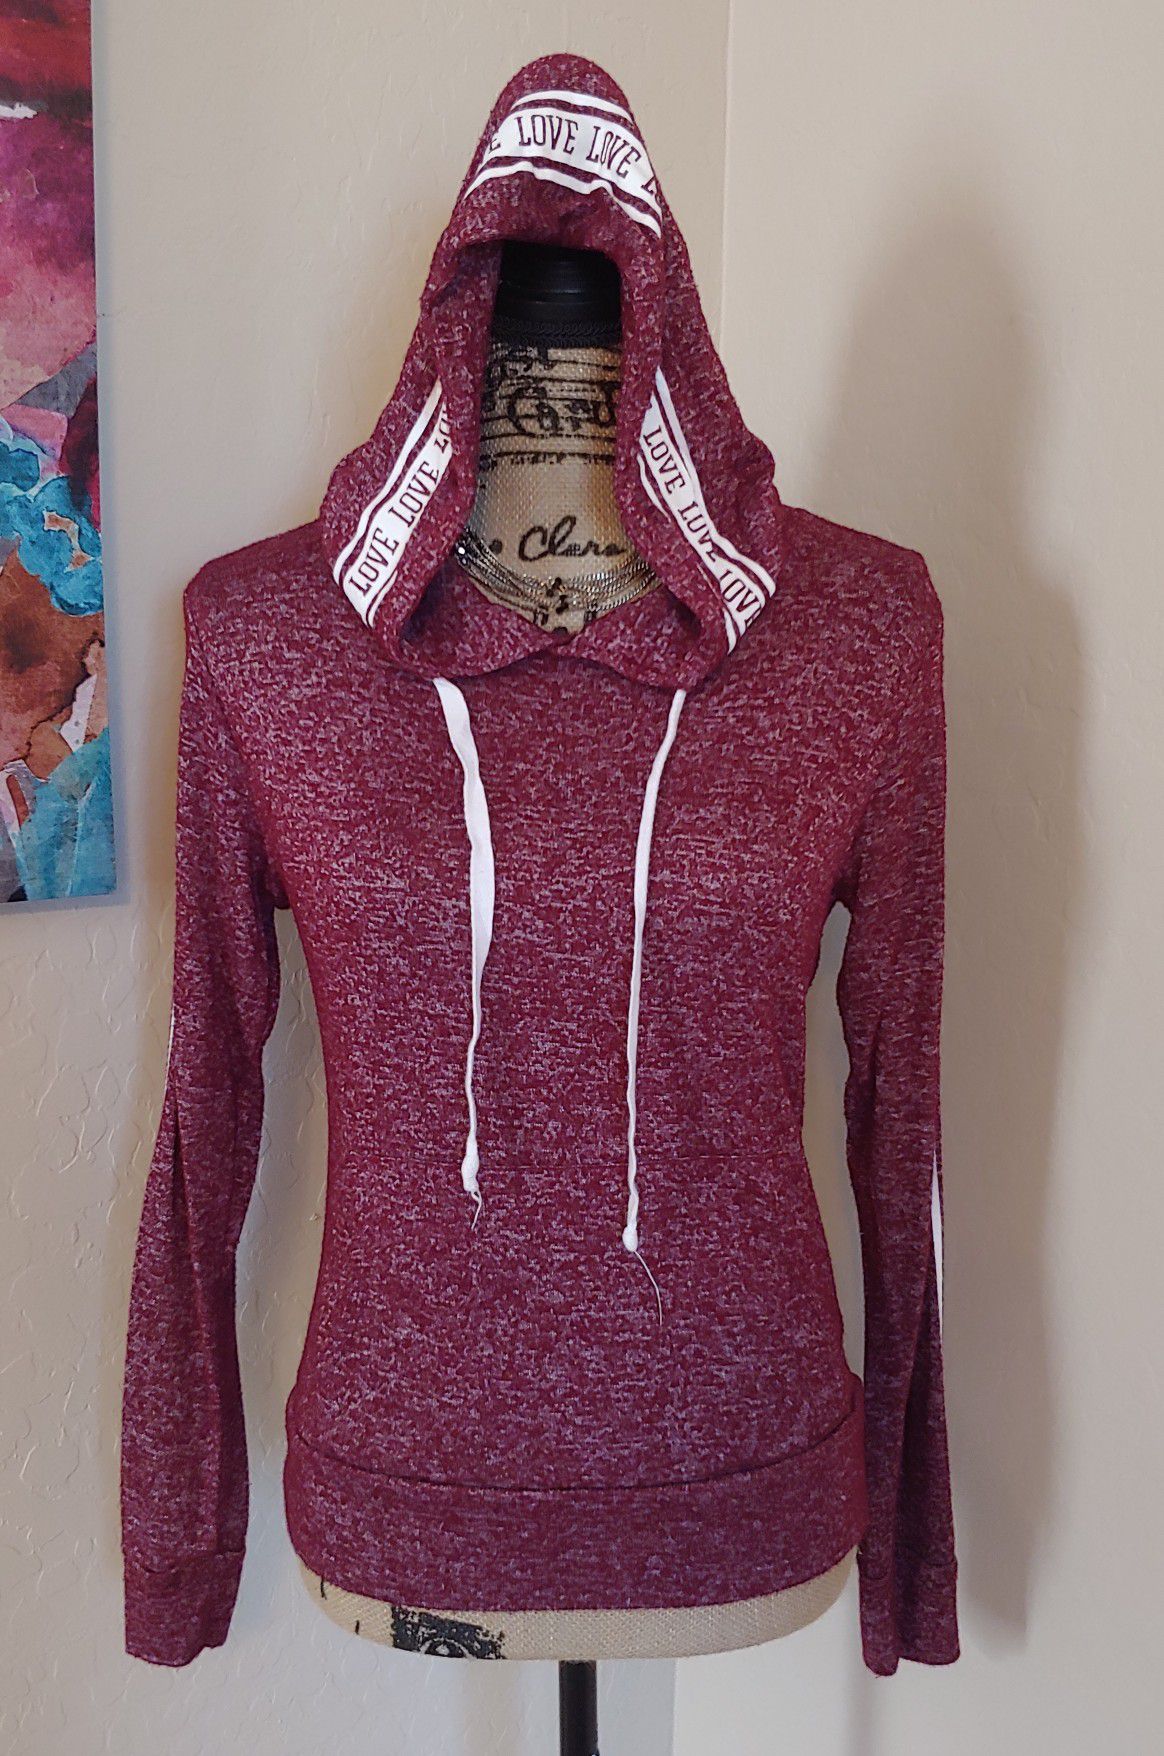 Hoodie sweater size small